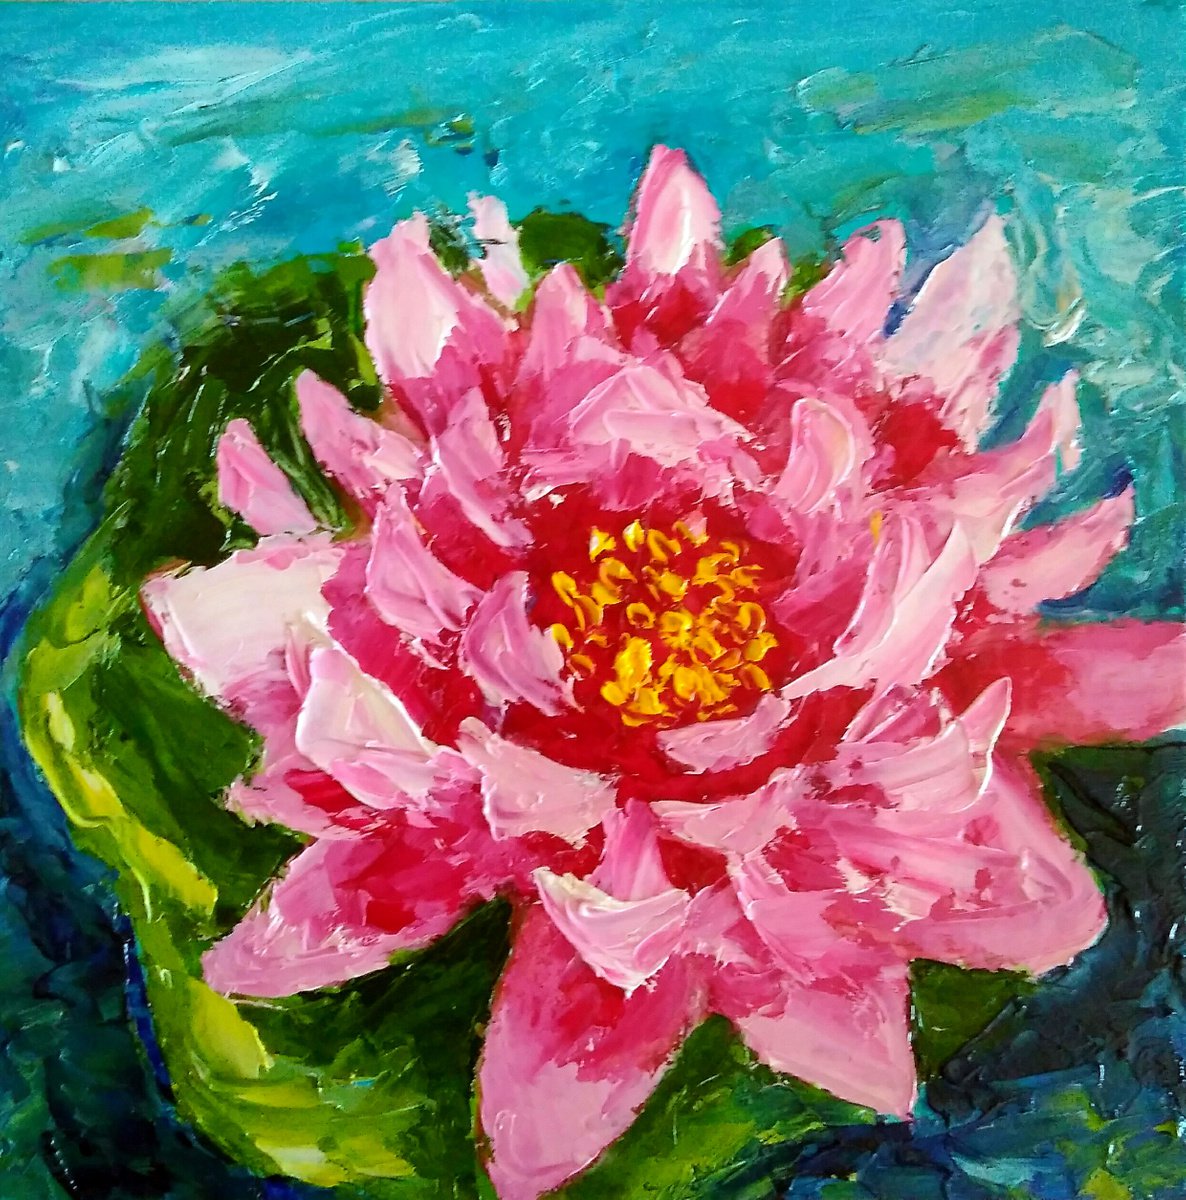 Water Lily Painting Lotus Artwork Pond Monet Flower Wall Art Small Floral Oil Painting by Yulia Berseneva